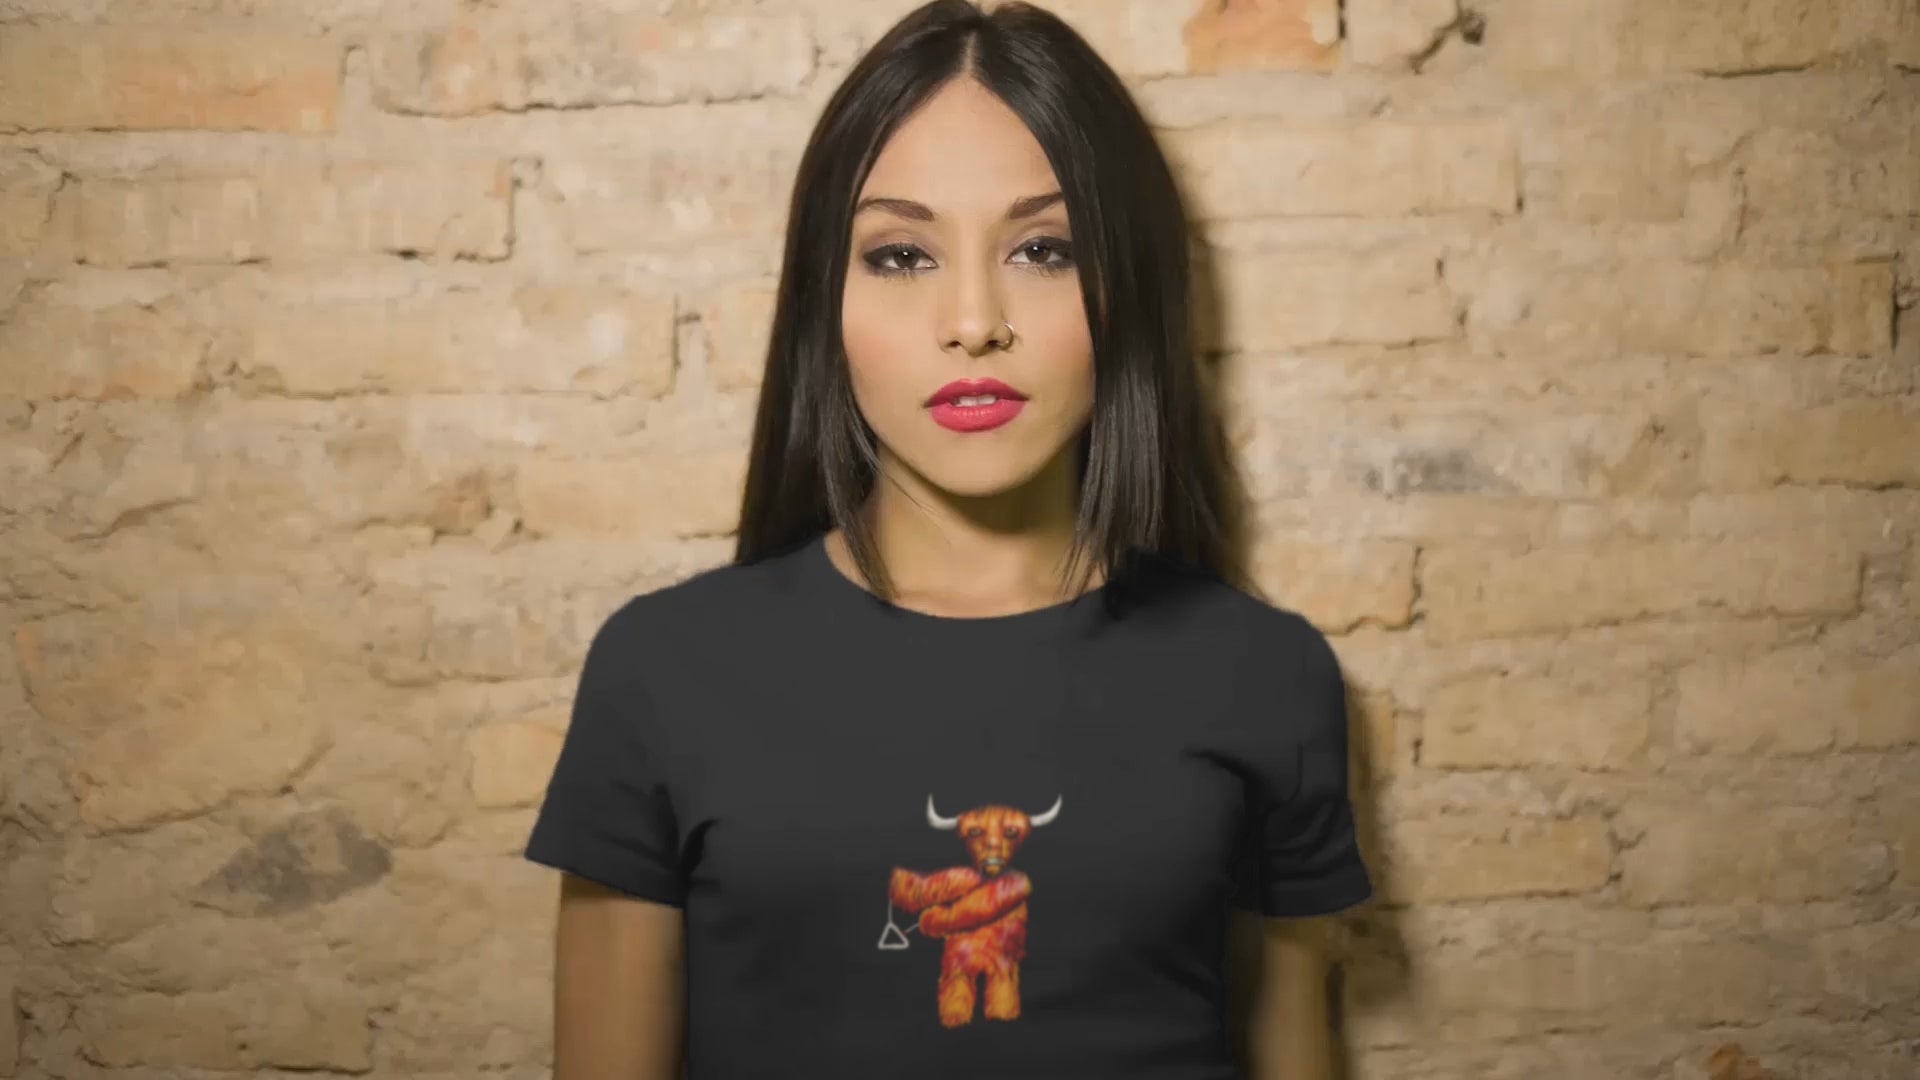 Bull With Triangle | Women's 100% Organic Cotton T Shirt worn by a woman